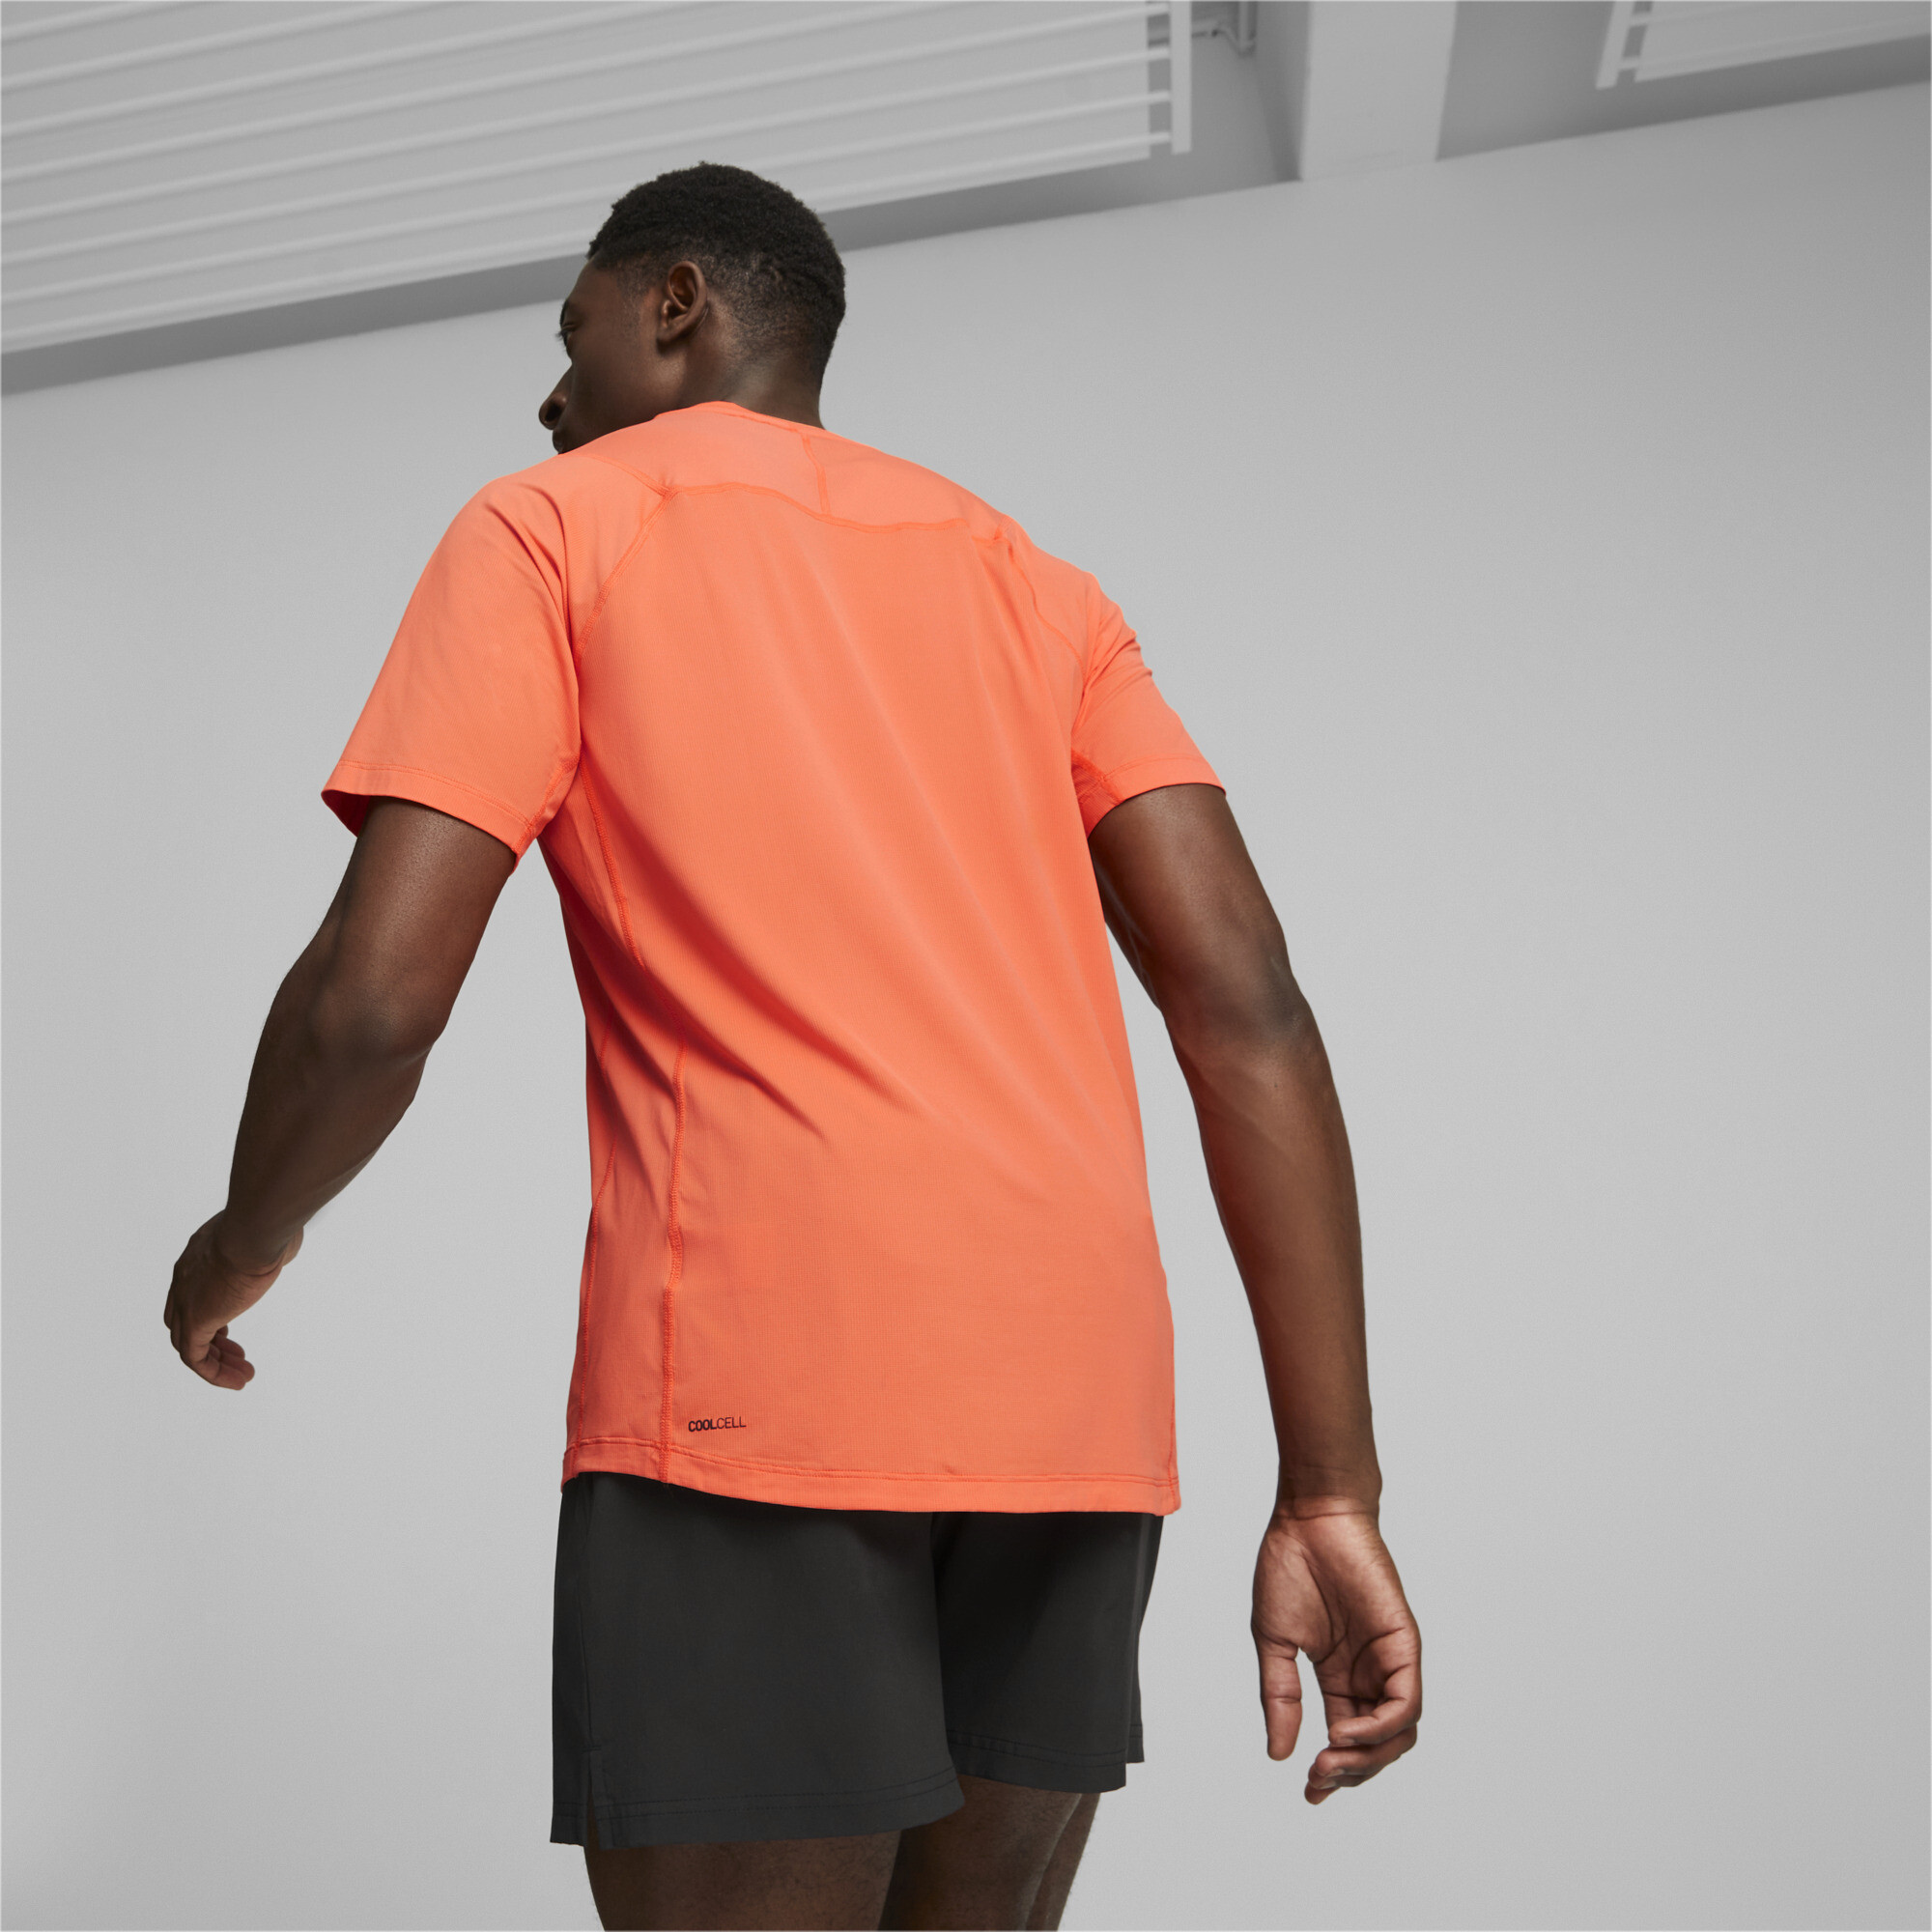 Men's PUMA SEASONS CoolCELL Trail Running T-Shirt In Orange, Size Small